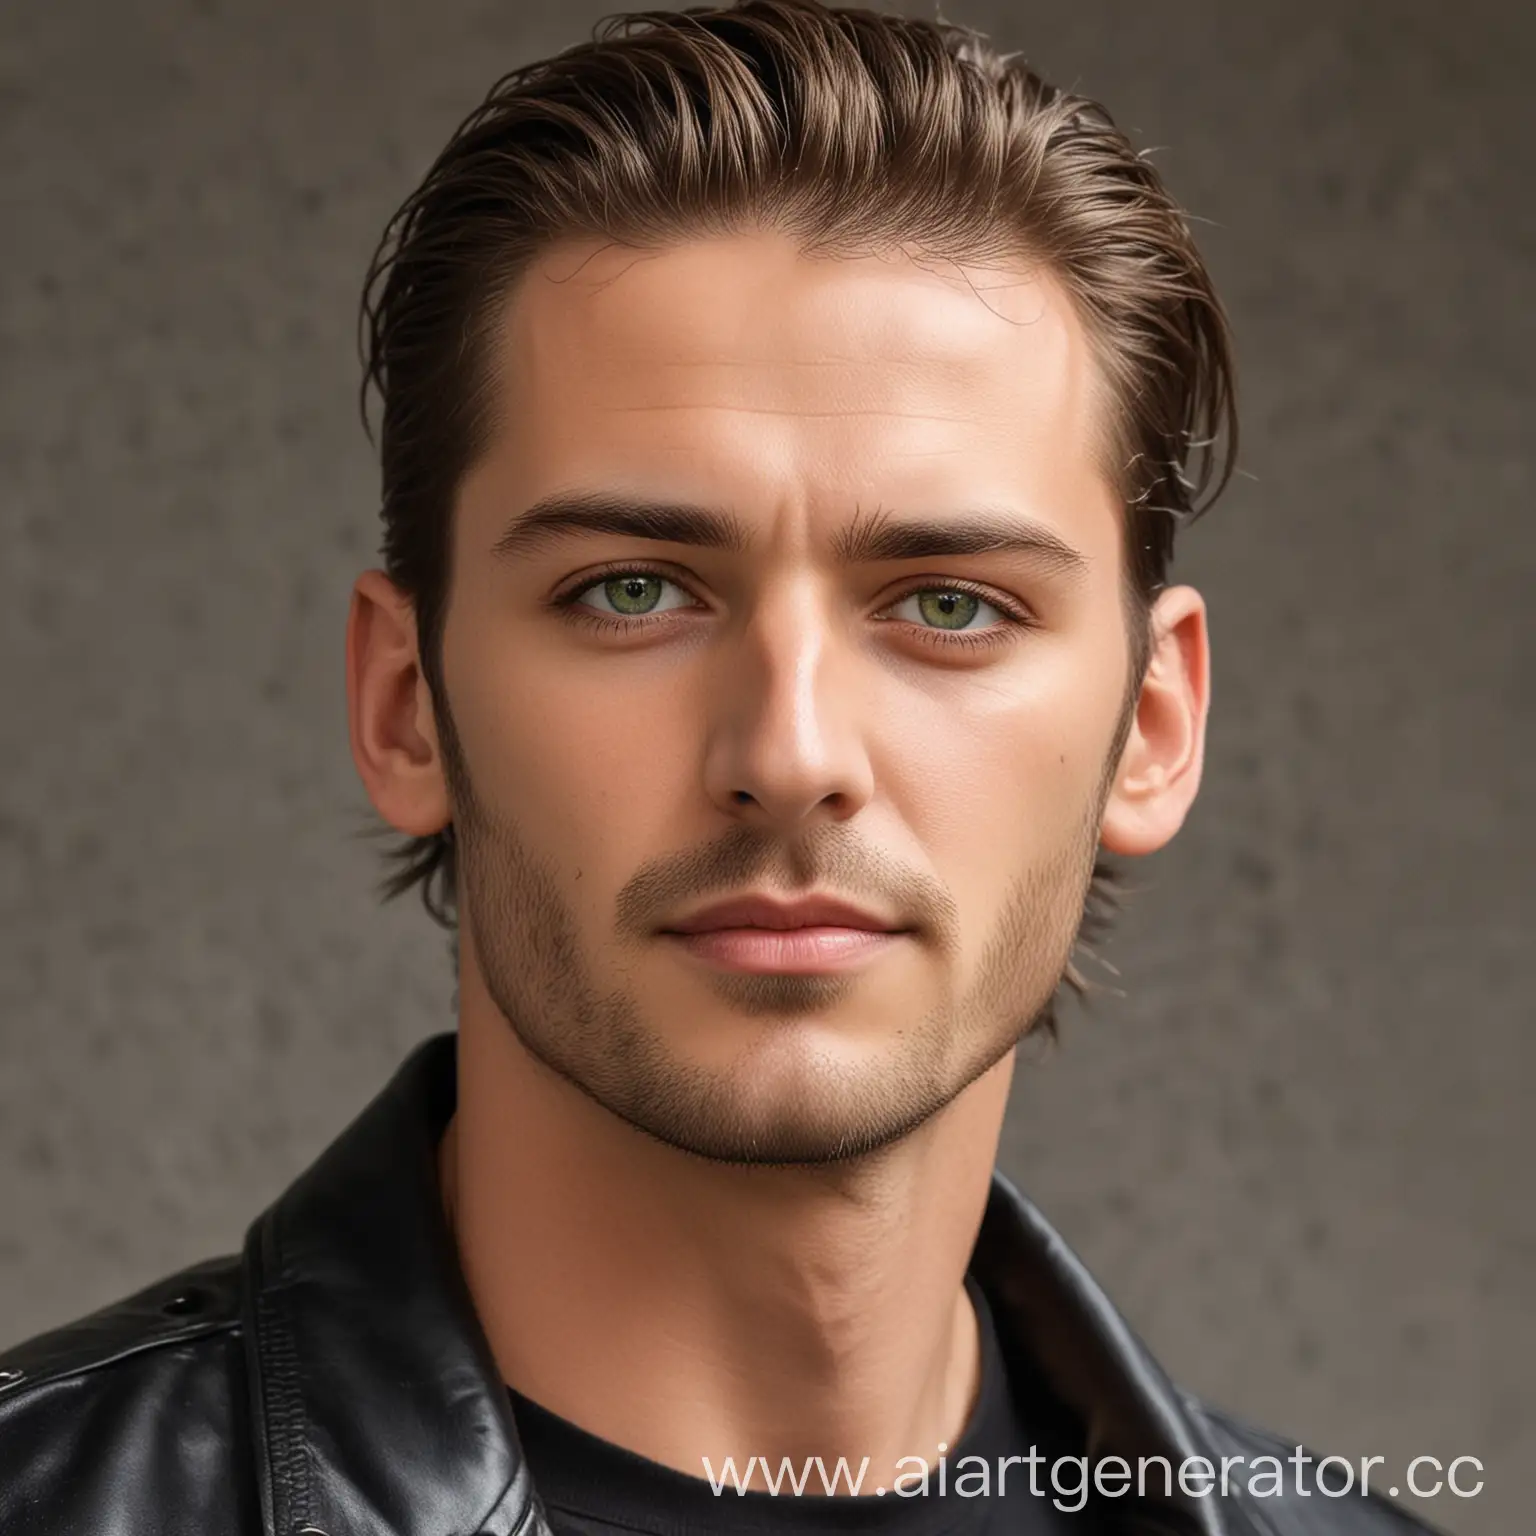 Stylish-Man-in-Black-Leather-Jacket-with-Fair-Hair-and-Green-Eyes